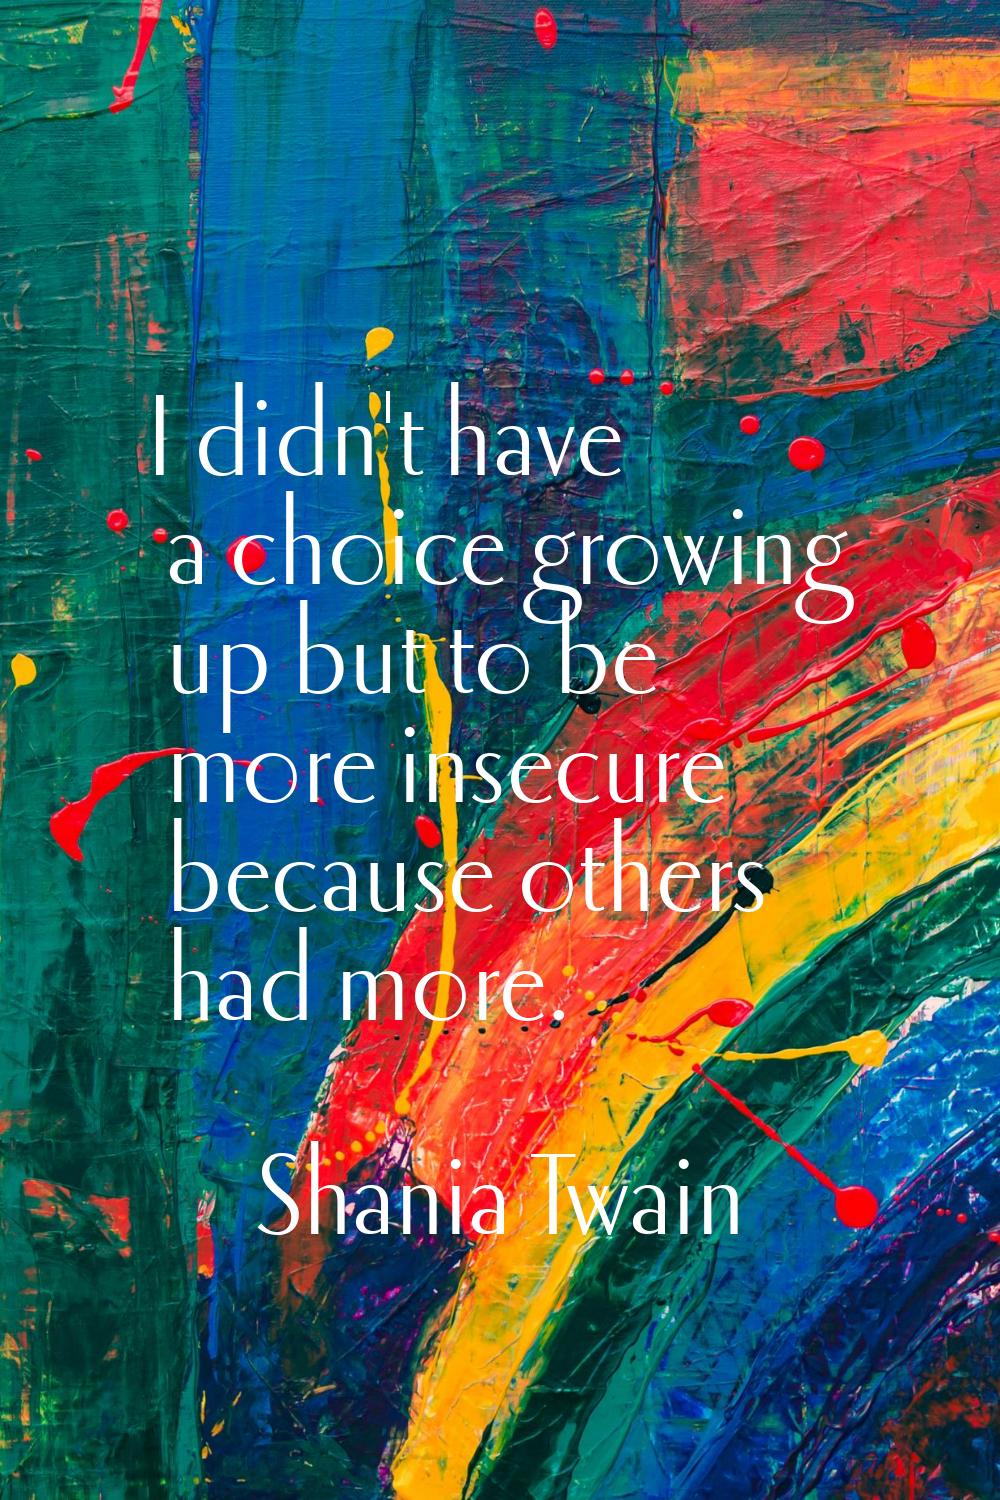 I didn't have a choice growing up but to be more insecure because others had more.